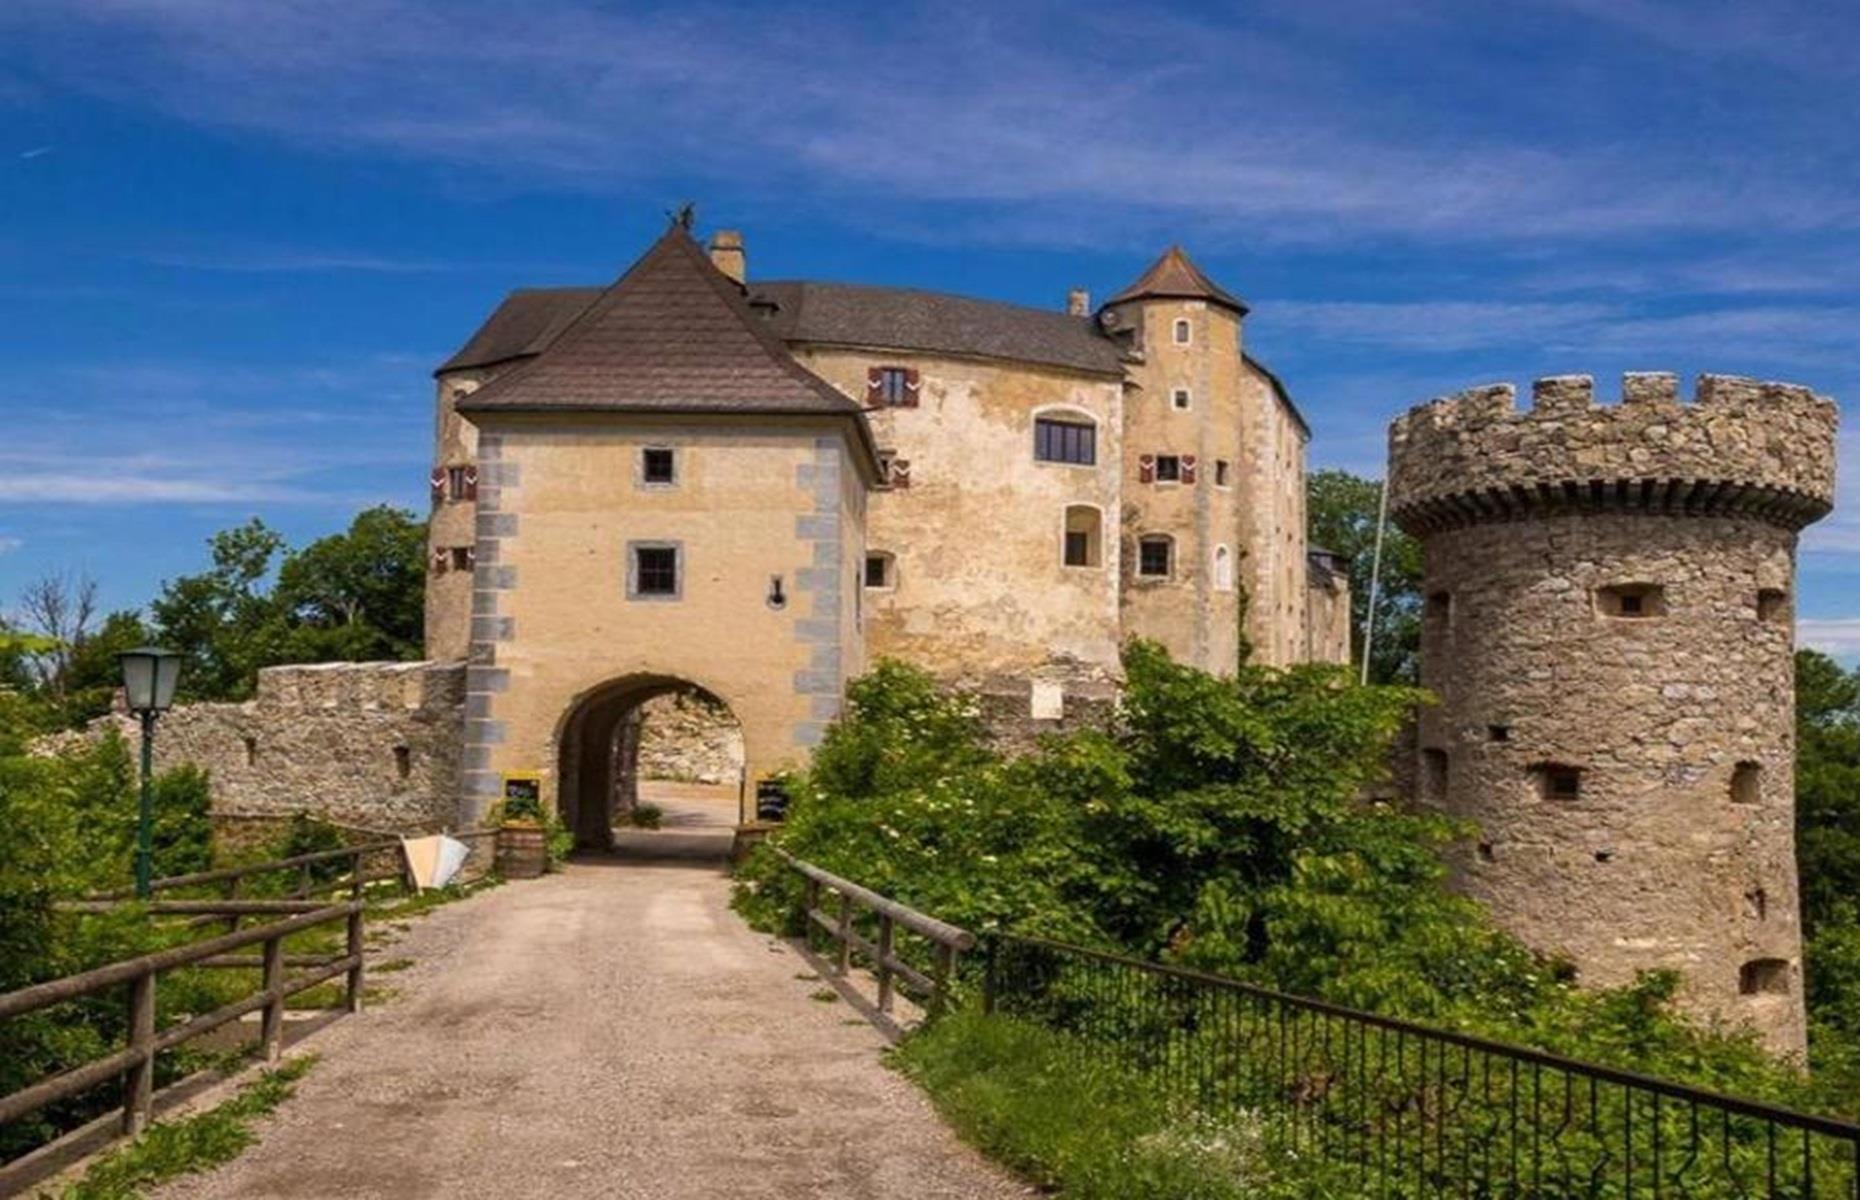 <p>Since then, Erich has dedicated his time to reviving the castle using original materials and attention to detail, while considering contemporary comforts.</p>  <p>He regularly works away, so rents out numerous rooms in the castle on Airbnb enabling lucky guests to experience life inside one of Austria's most remarkable historic homes.</p>